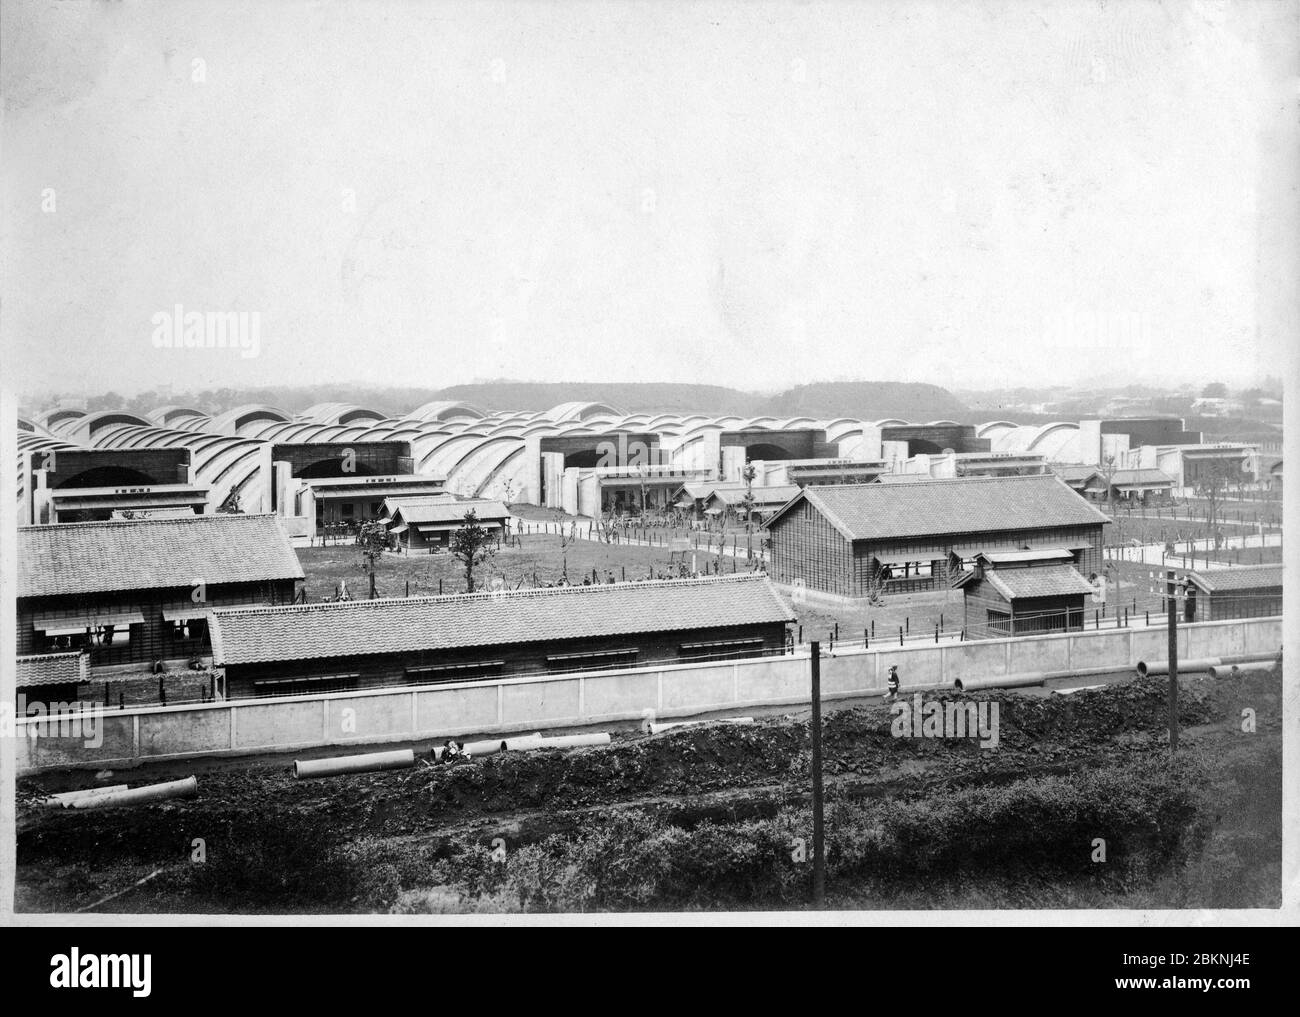 [ 1920s Japan - Japanese Military Firing Range ] —   Panoramic view of the Toyama Firing Range (戸山射撃場, Toyama Shagekijo) in Okubo (大久保), Tokyo. It was used by the Imperial Guard.   It consisted of seven 300 meter long reinforced concrete buildings into which soldiers shot their automatic and other weapons.  From a private photo album of a member of the Japanese Imperial Guard (Konoe Shidan) who served between 1928 (Showa 3) and 1930 (Showa 5).  20th century gelatin silver print. Stock Photo